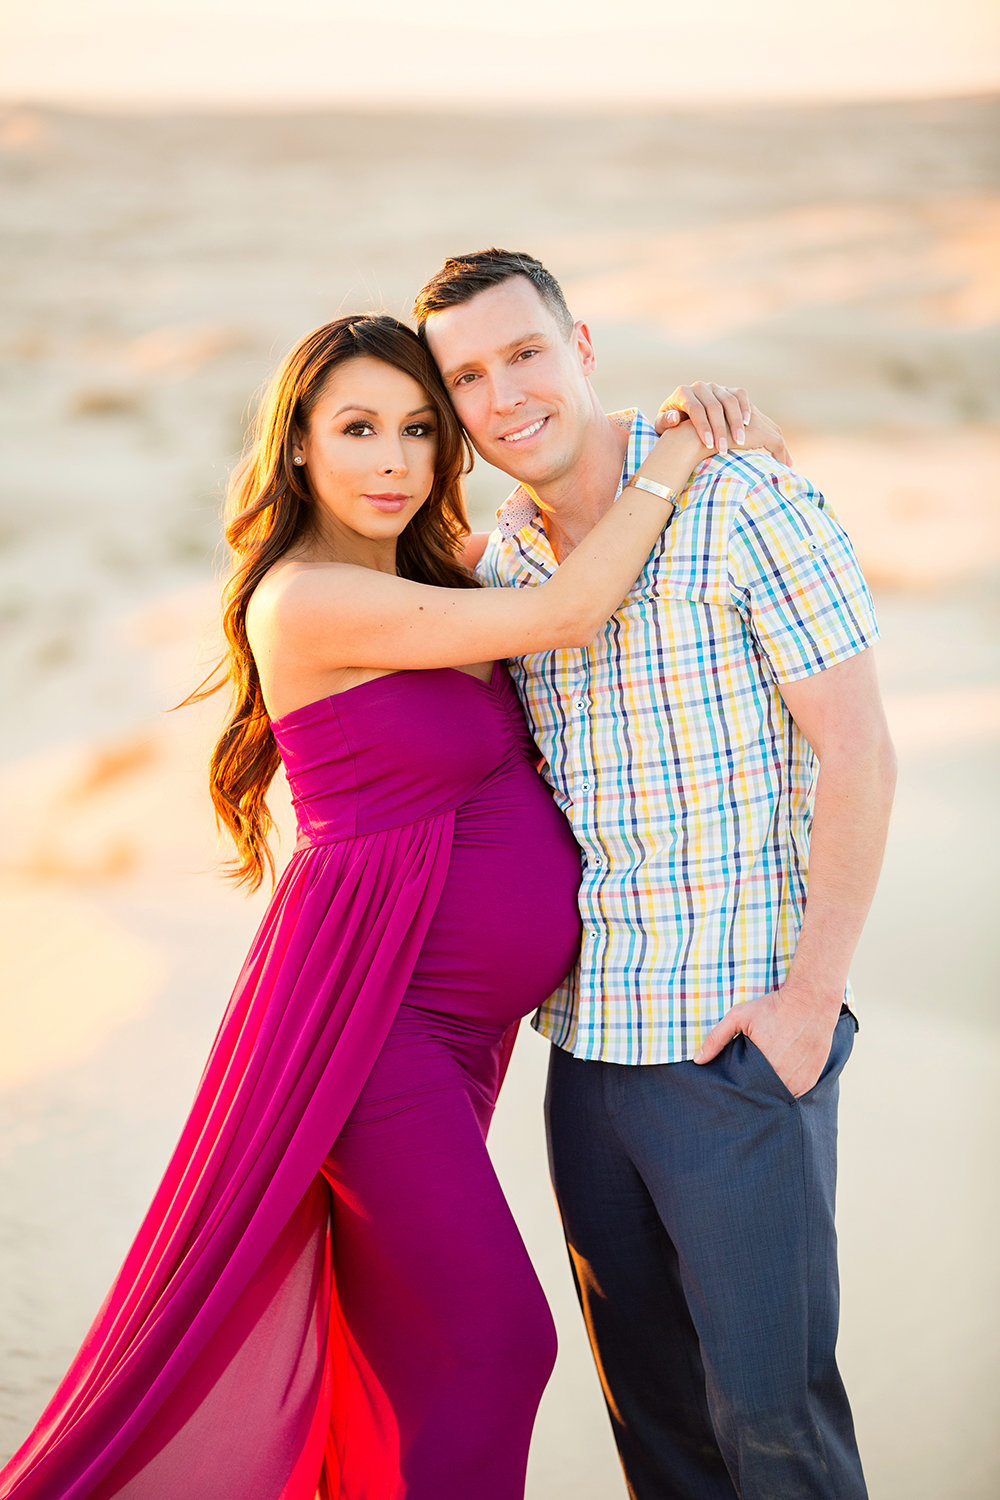 Intimate sunset Maternity Session at the Glamis Sands Dunes.